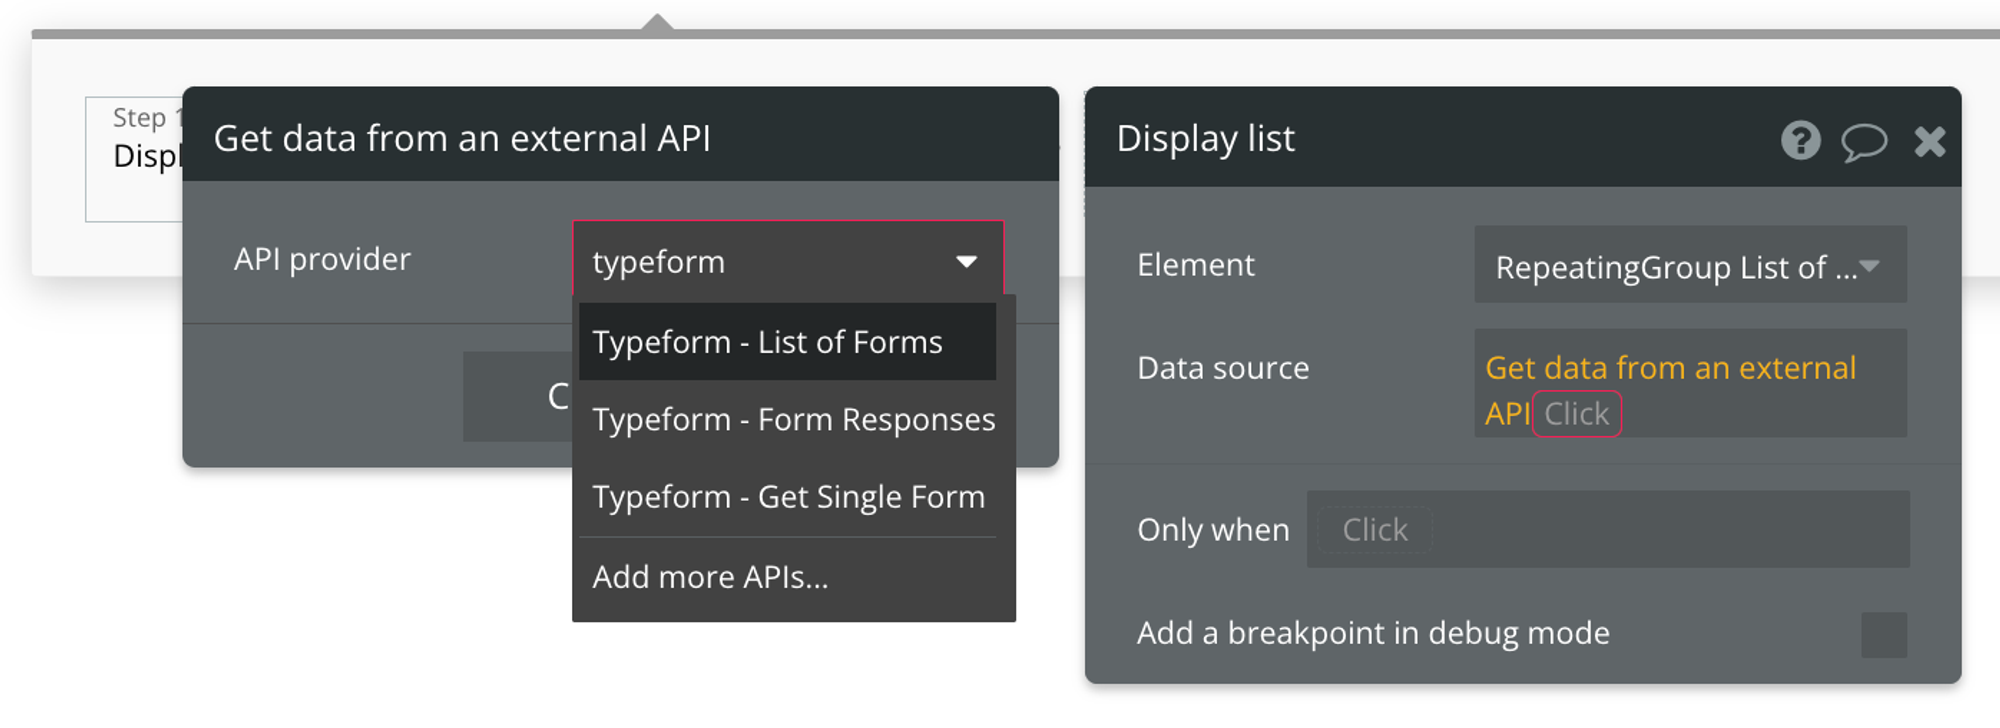 Select "Get data from external API" from the list of data sources, then find Typeform - List of Forms from the list of API providers